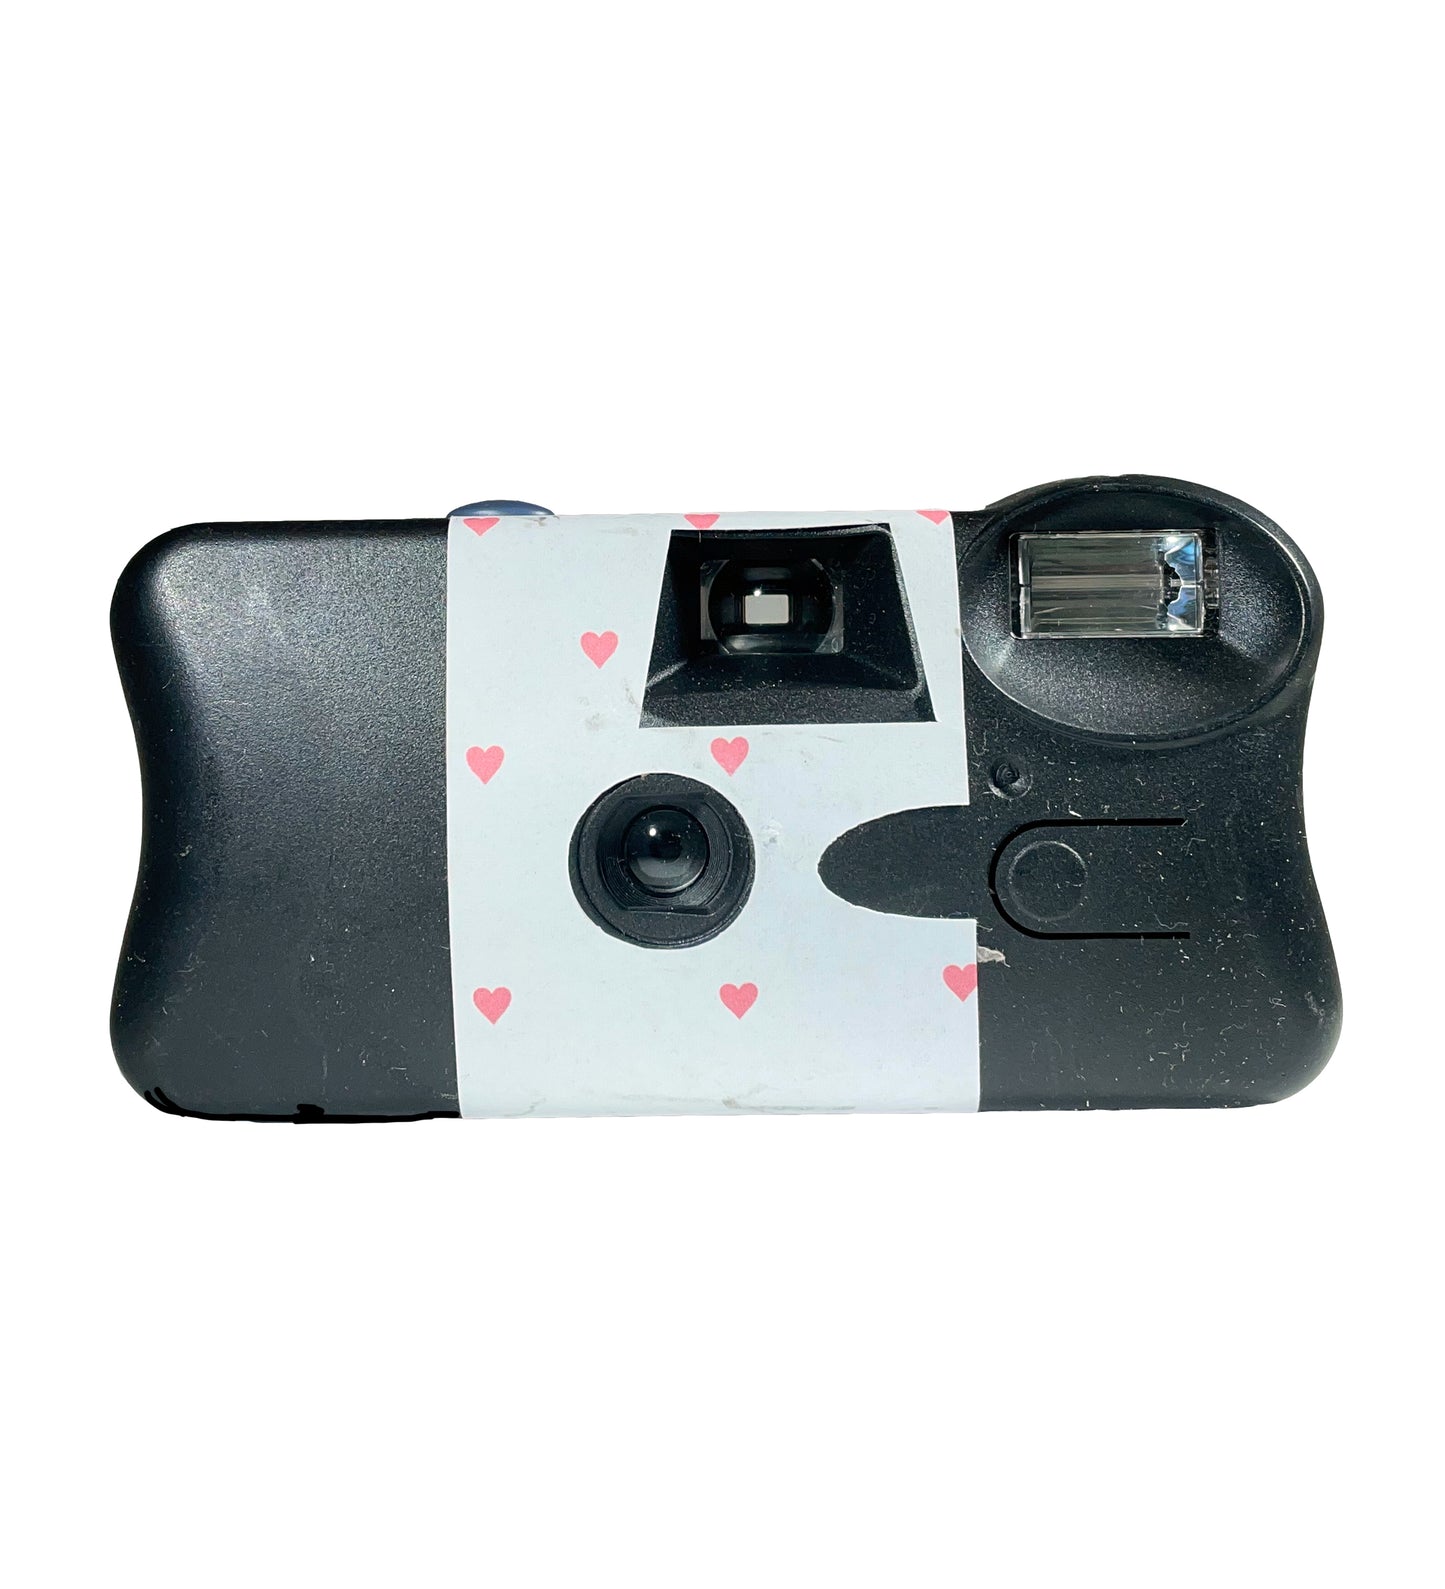 BKIFI Red Hearts 35mm Single Use Camera 27 Exposures (£16.99 incl VAT)